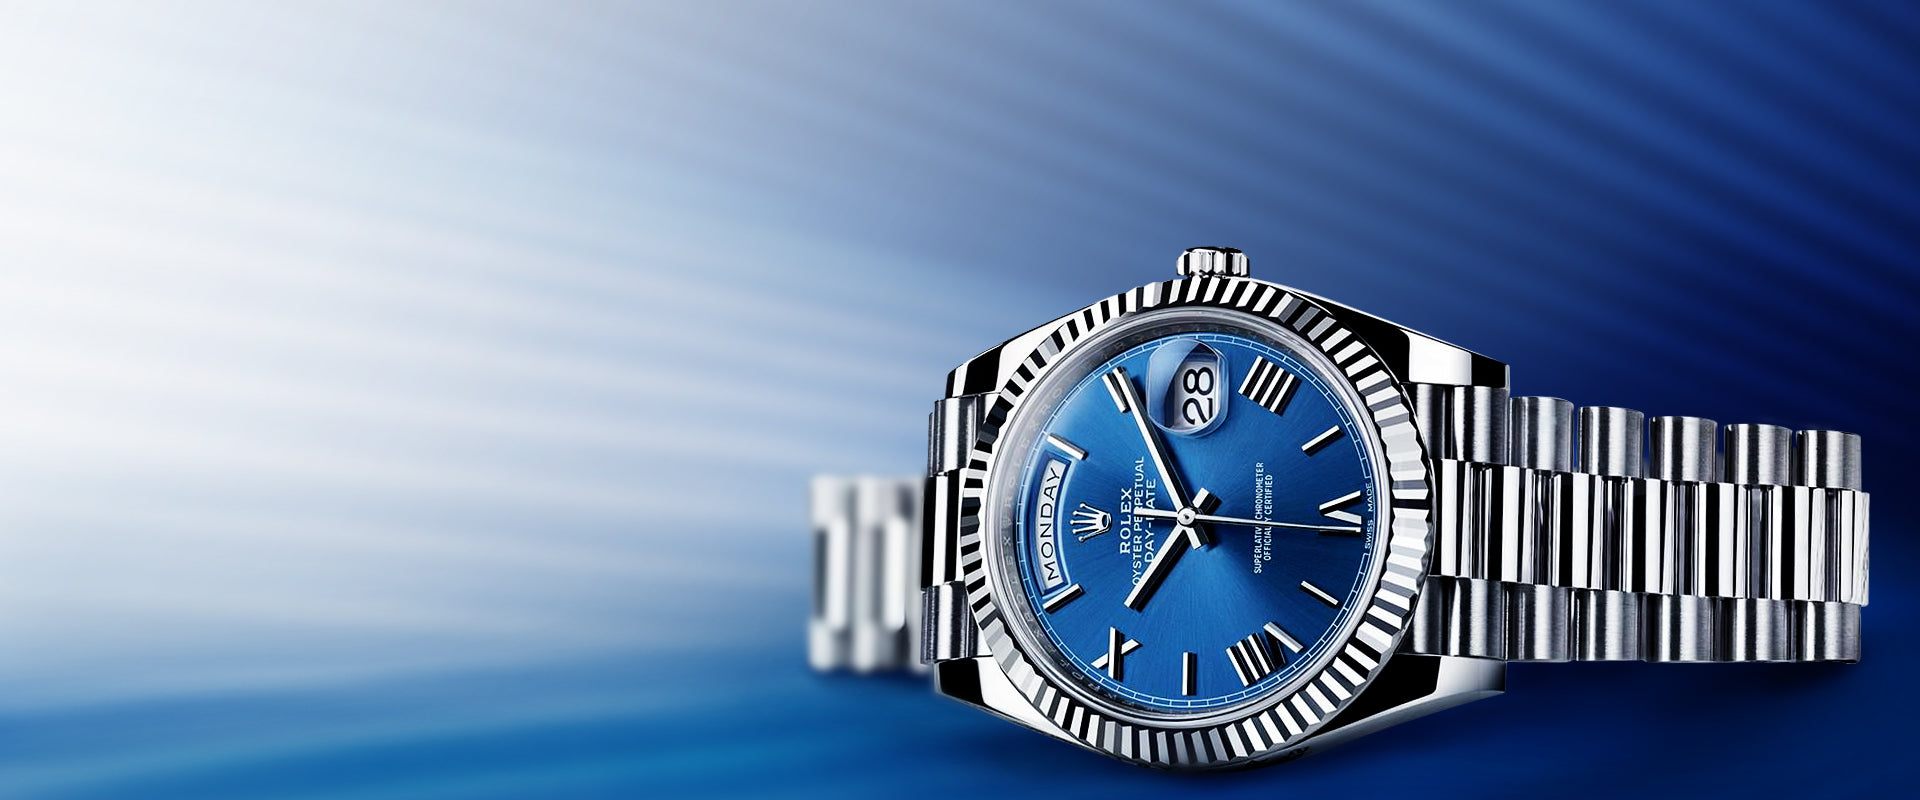 Rolex Is the King of Luxury Watches. Here's How Watch Retailers